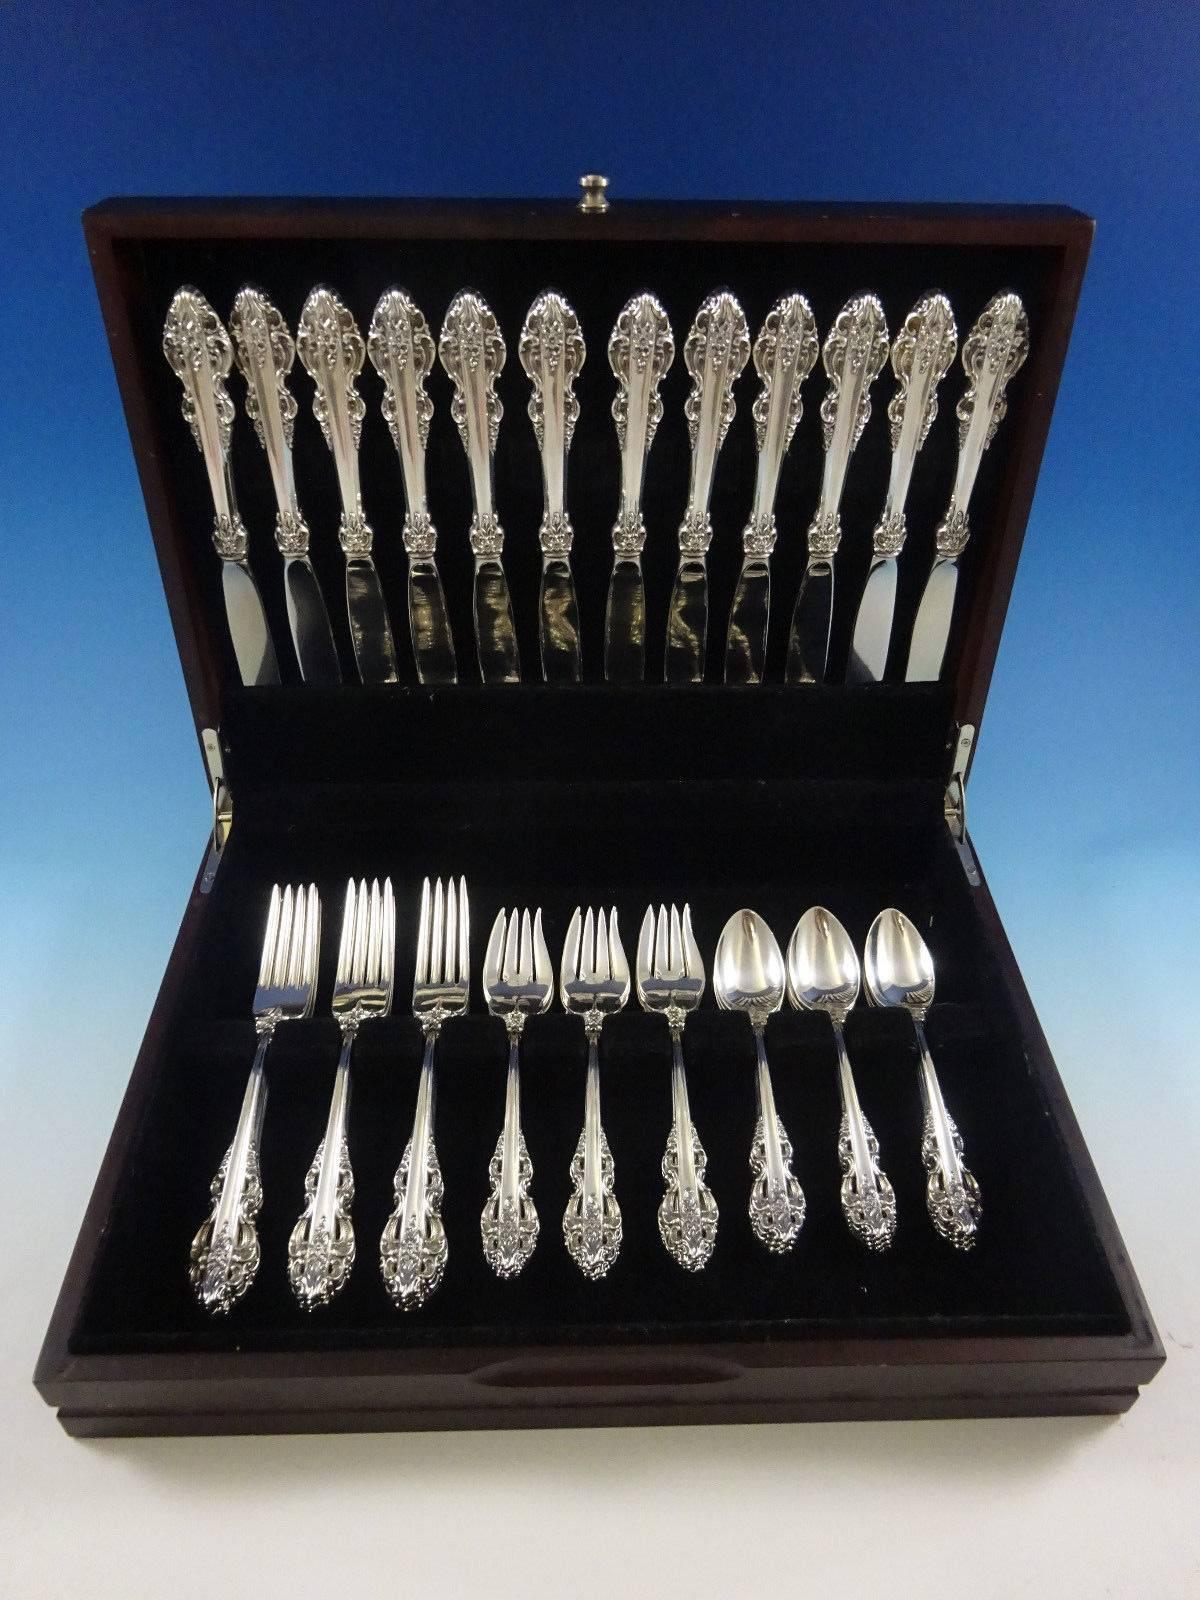 El Greco by Reed & Barton sterling silver flatware set, 48 pieces. This set includes: 

12 knives, 9 1/4